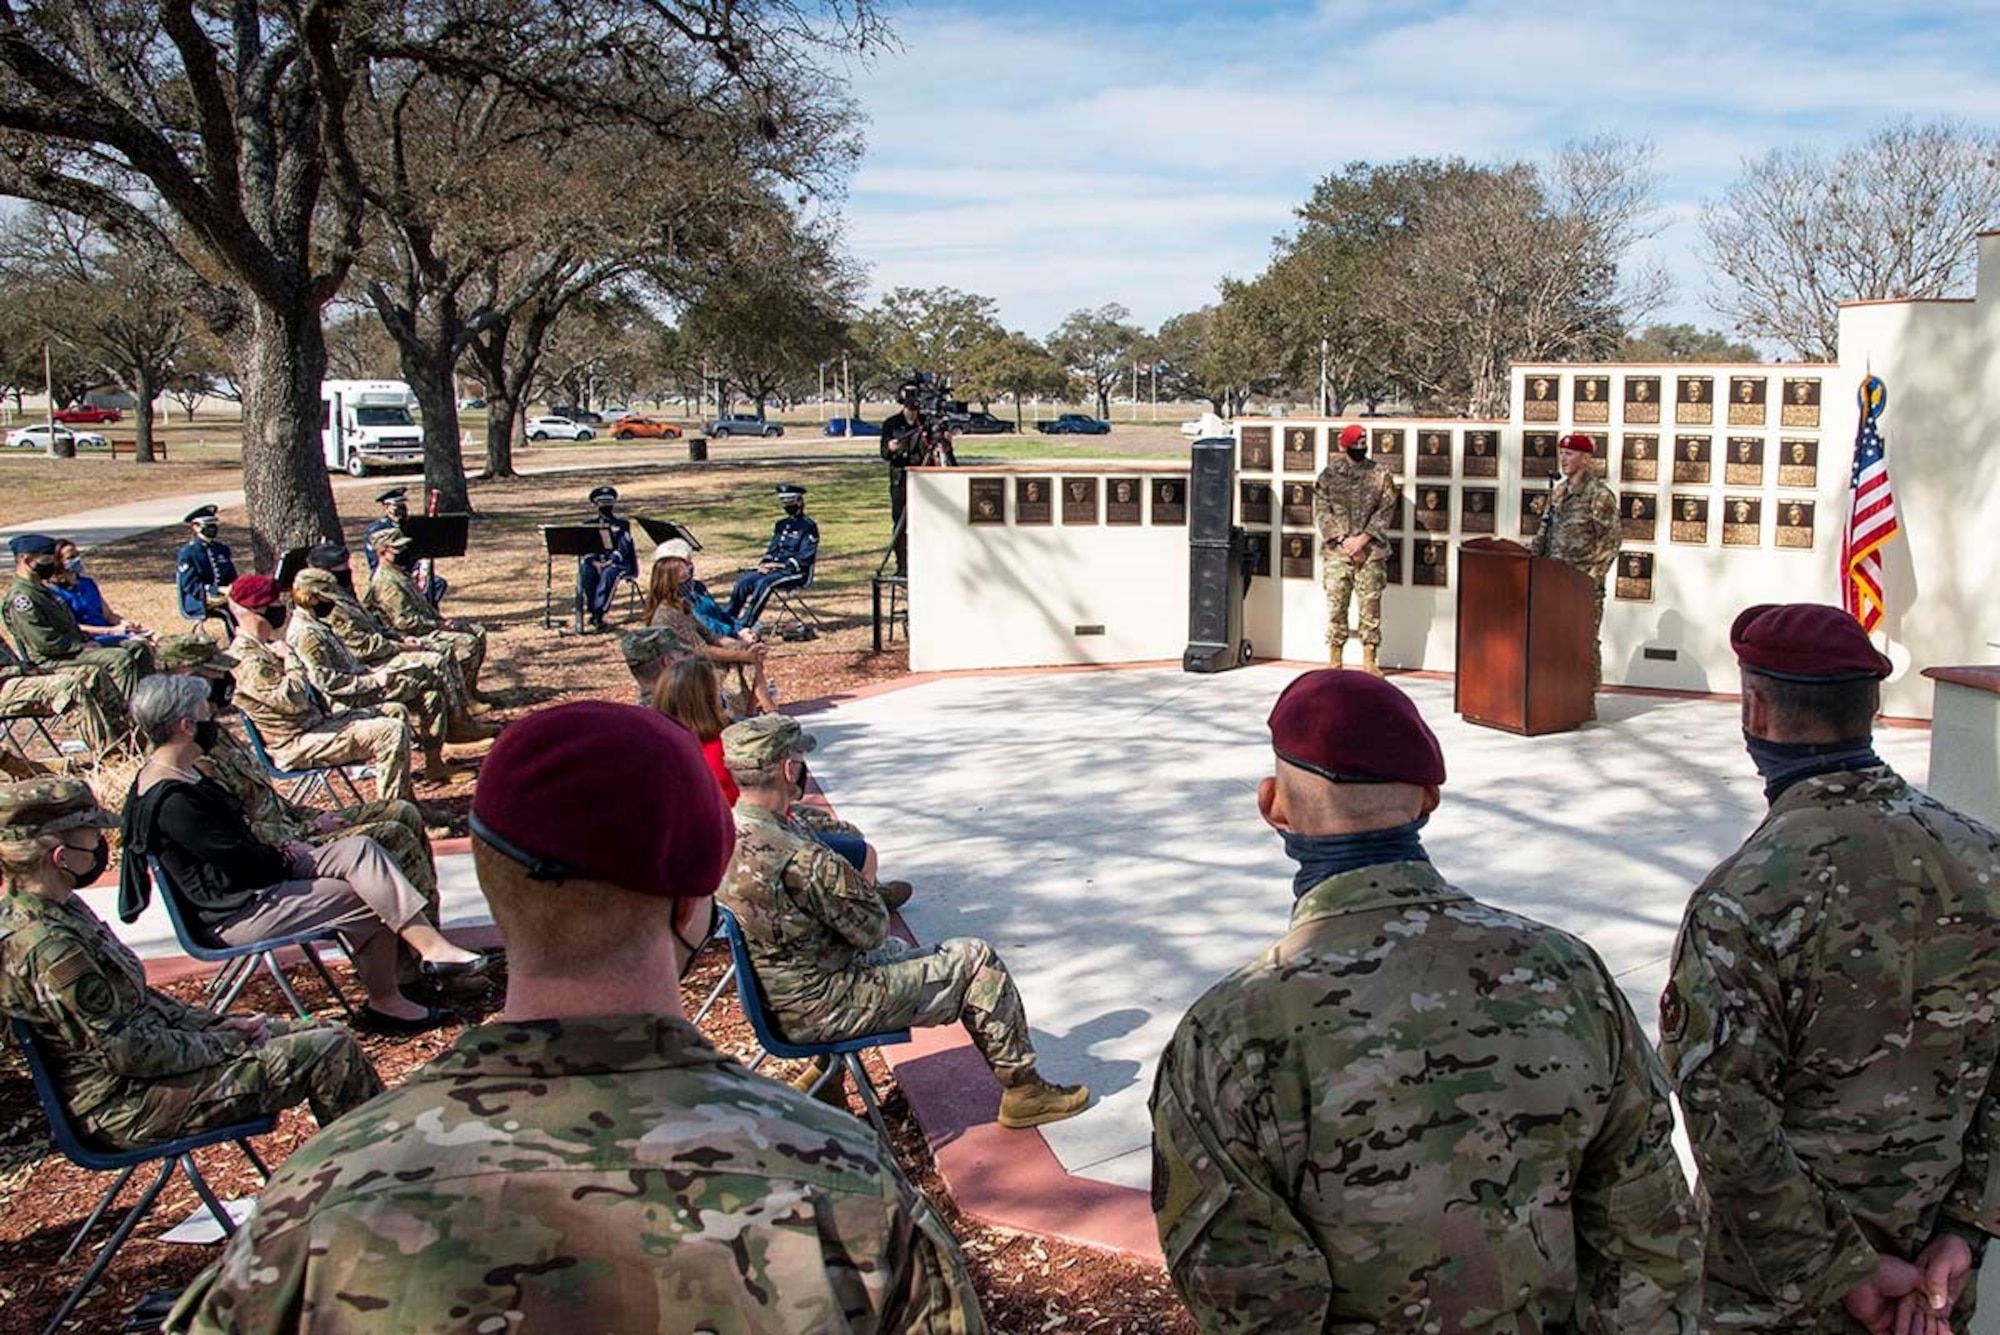 U.S. Air Force Col. Mason Dula, Special Warfare Training Wing commander, speaks during the Master Sgt. John Chapman Medal of Honor plaque unveiling ceremony at Airmen’s Heritage Park at Joint Base San Antonio-Randolph March 4, 2021.